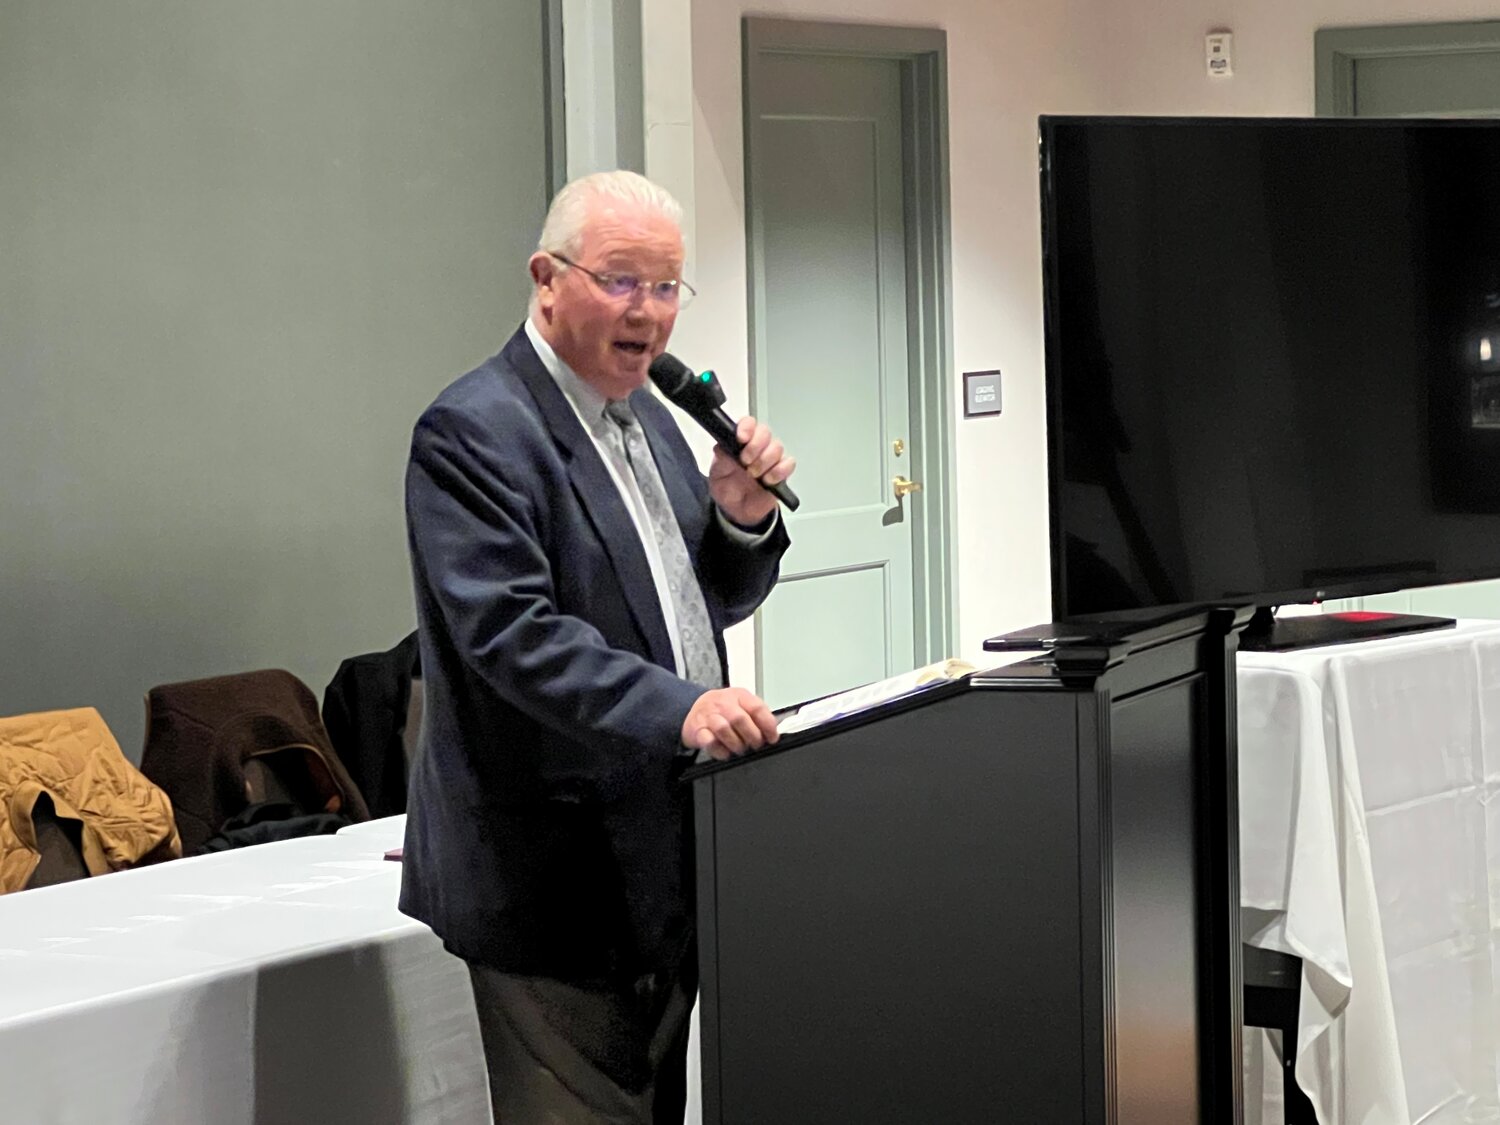 Pat Regan of Confluence Development, LLC thanked community leaders for the commitment, guidance and dedication to seeing development of The Confluence to fruition at a ceremony in the ballroom of the hotel Thursday night.